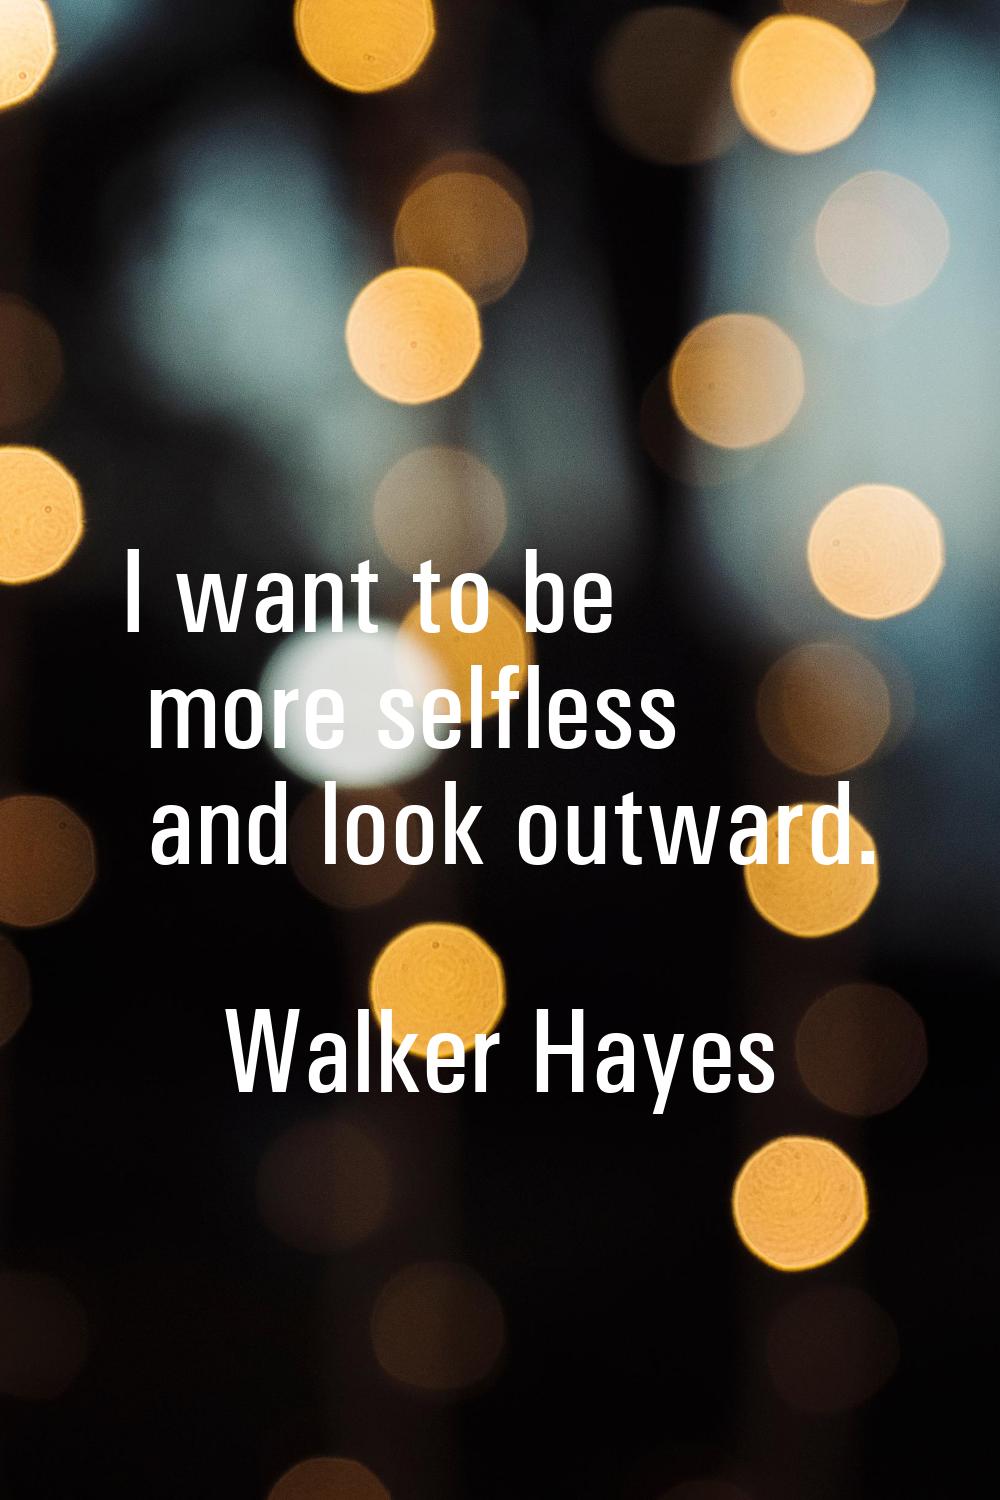 I want to be more selfless and look outward.